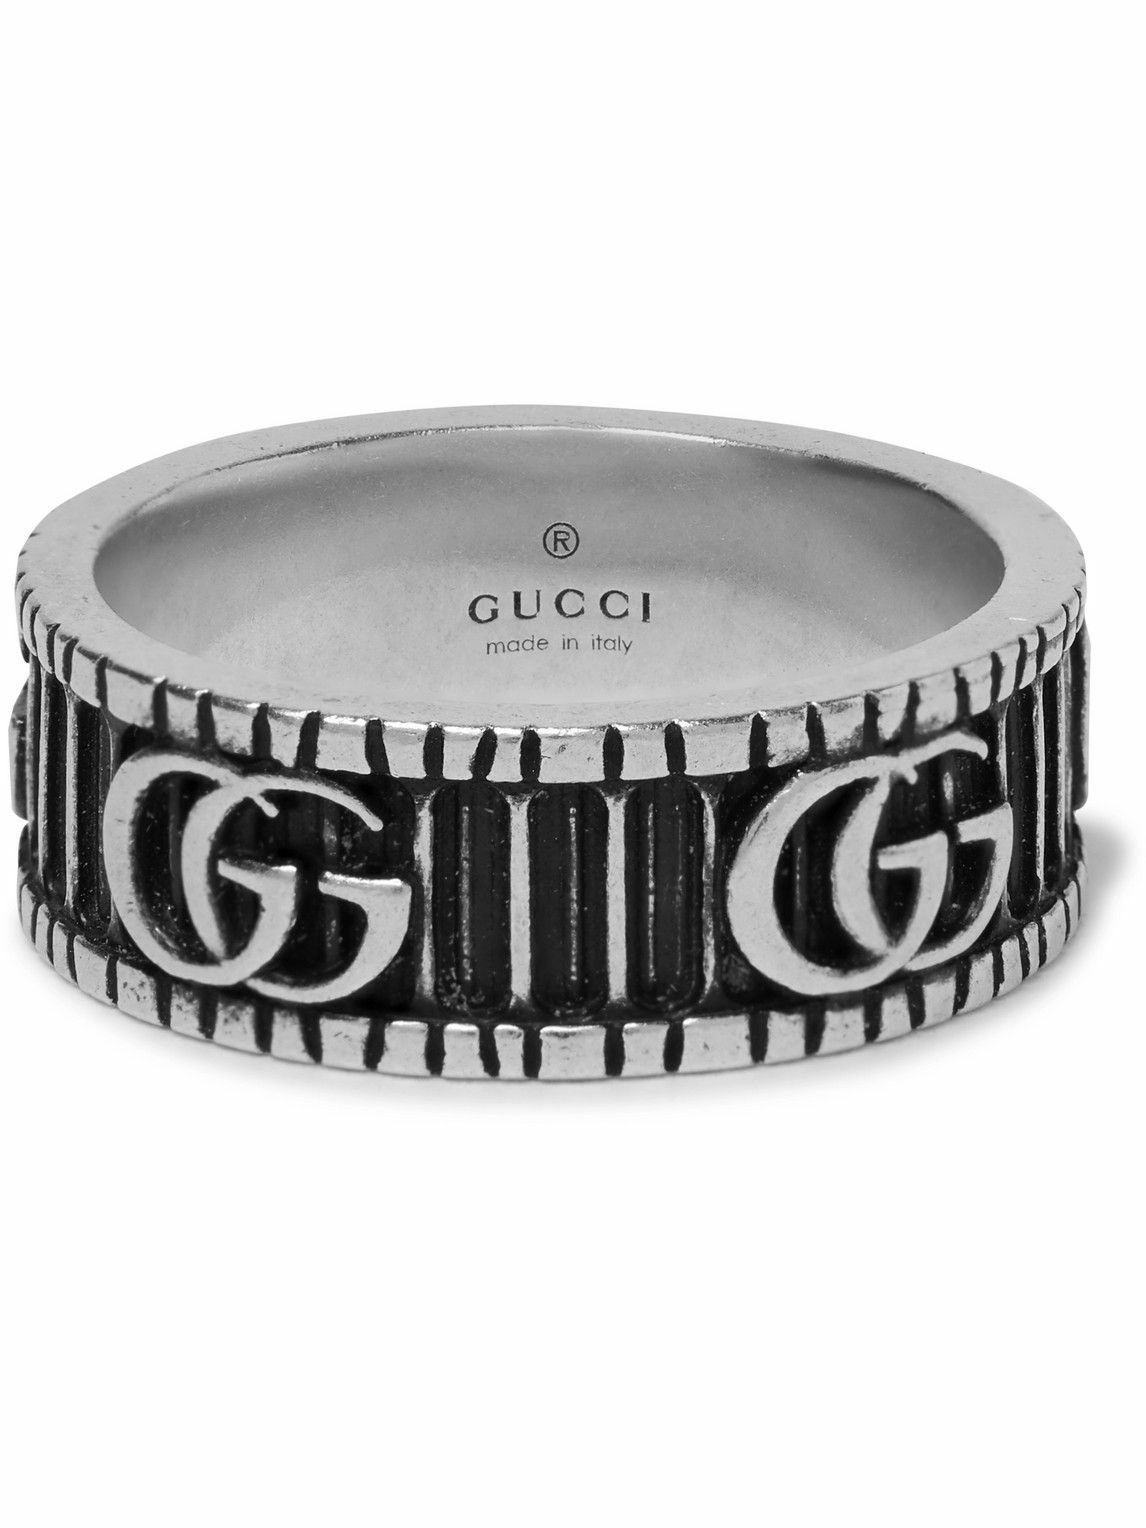 Photo: GUCCI - Engraved Silver Ring - Silver